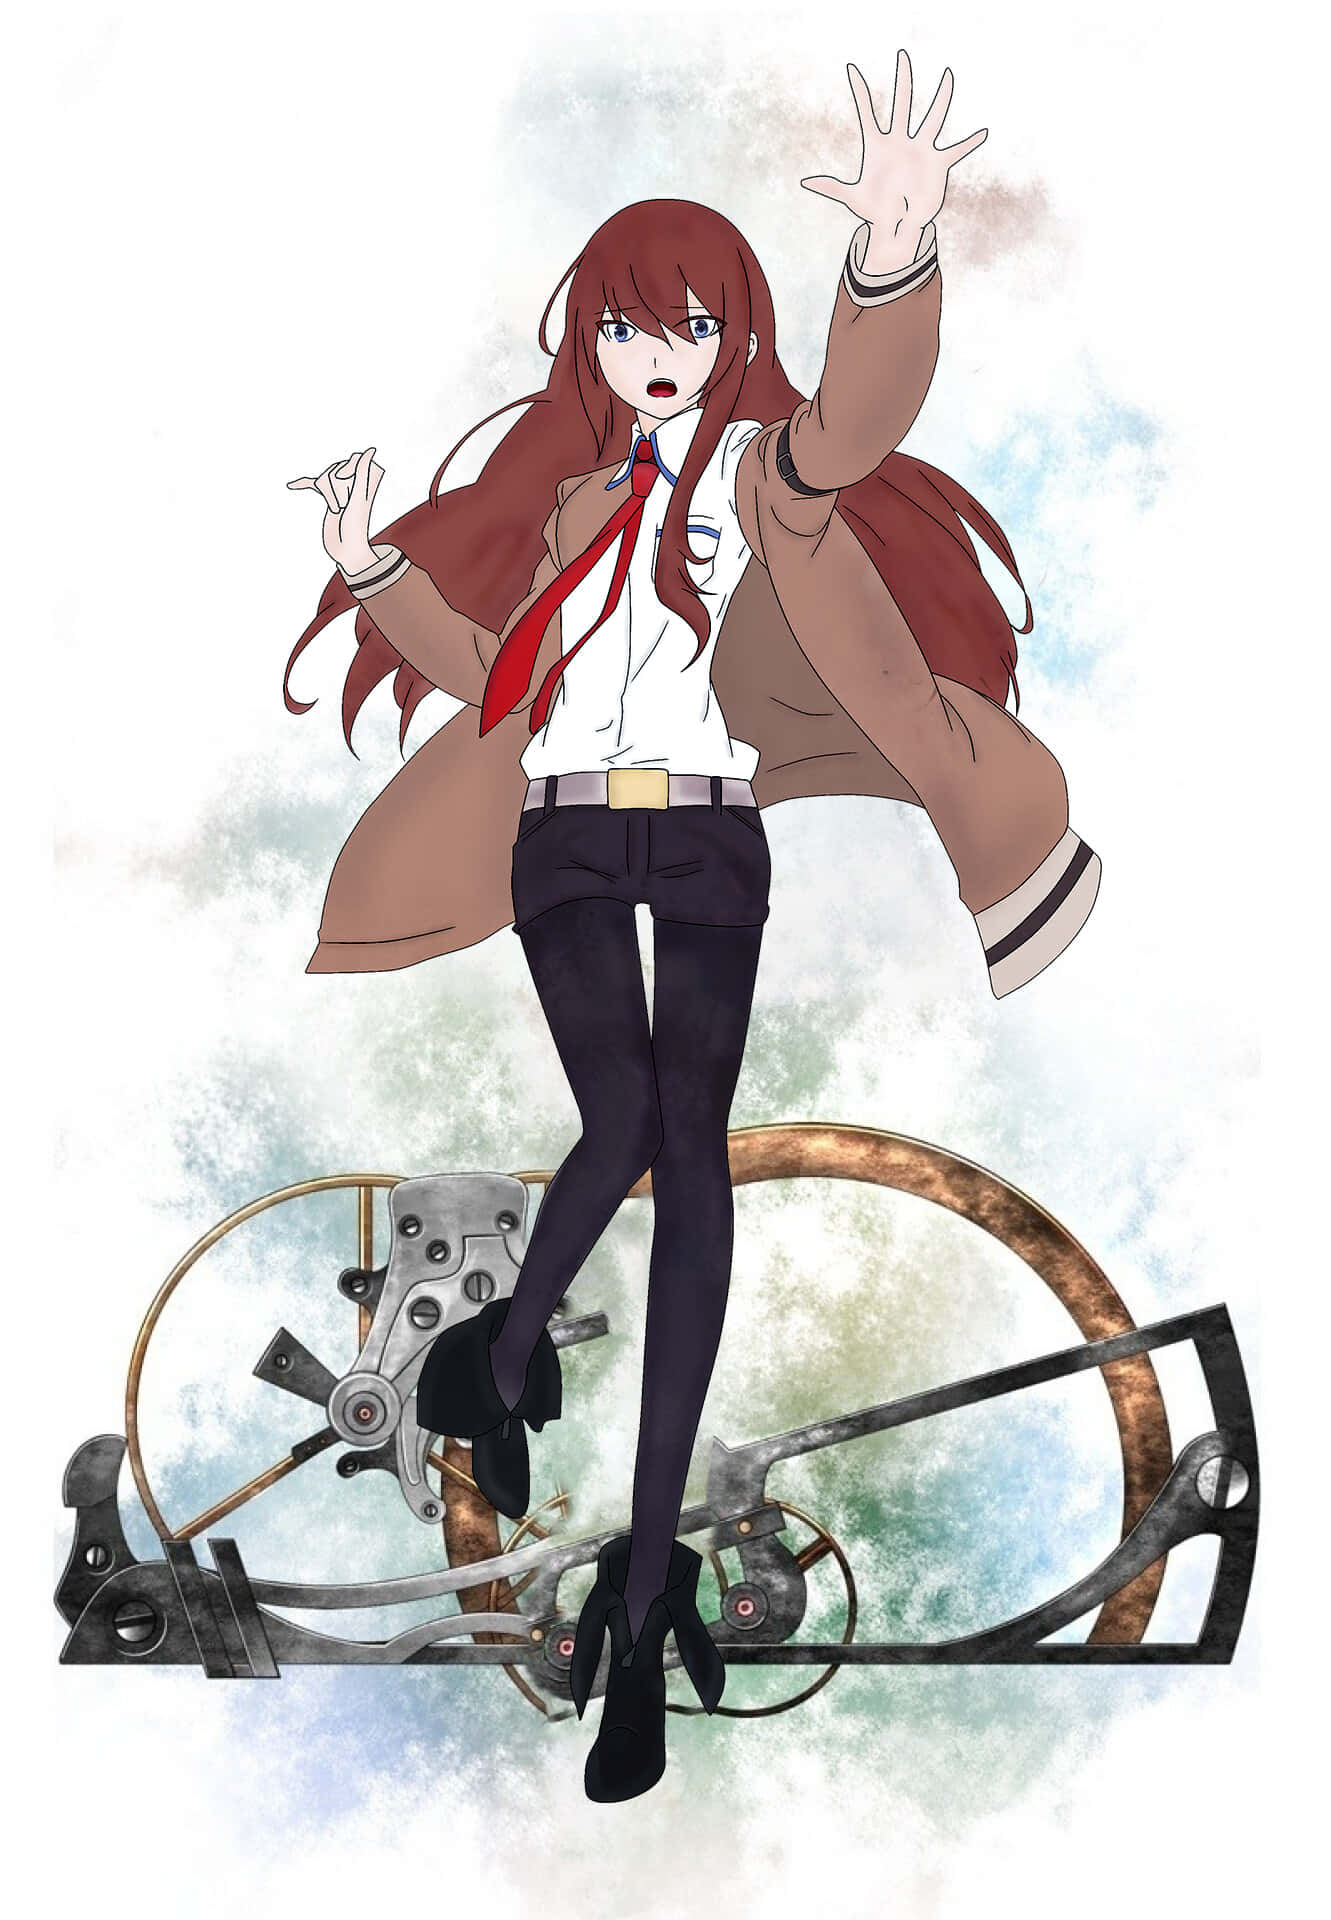 Kurisu Makise standing in a thoughtful pose on a city street Wallpaper